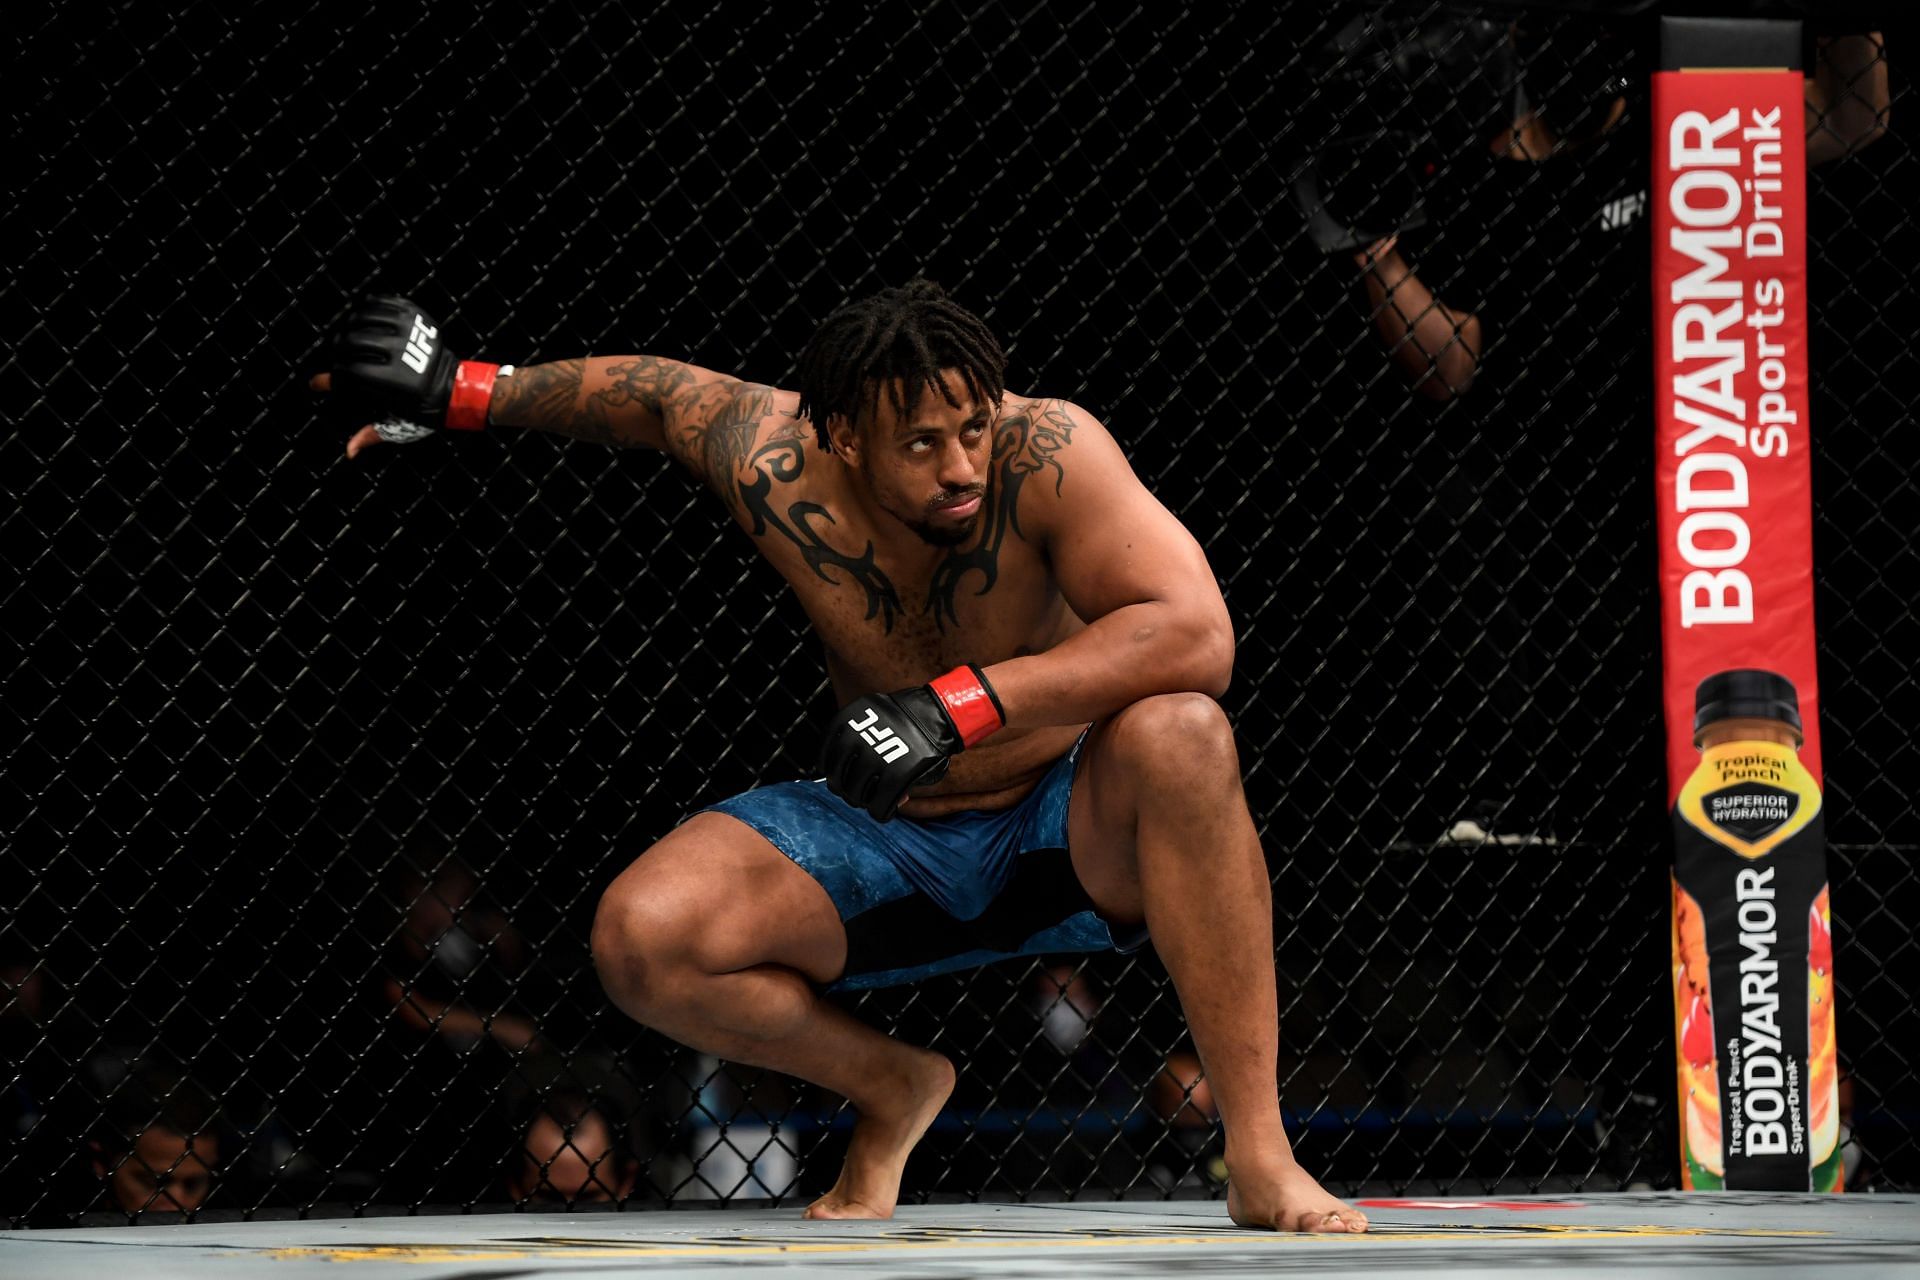 Greg Hardy has been the most high-profile - and controversial - NFL player to enter the octagon